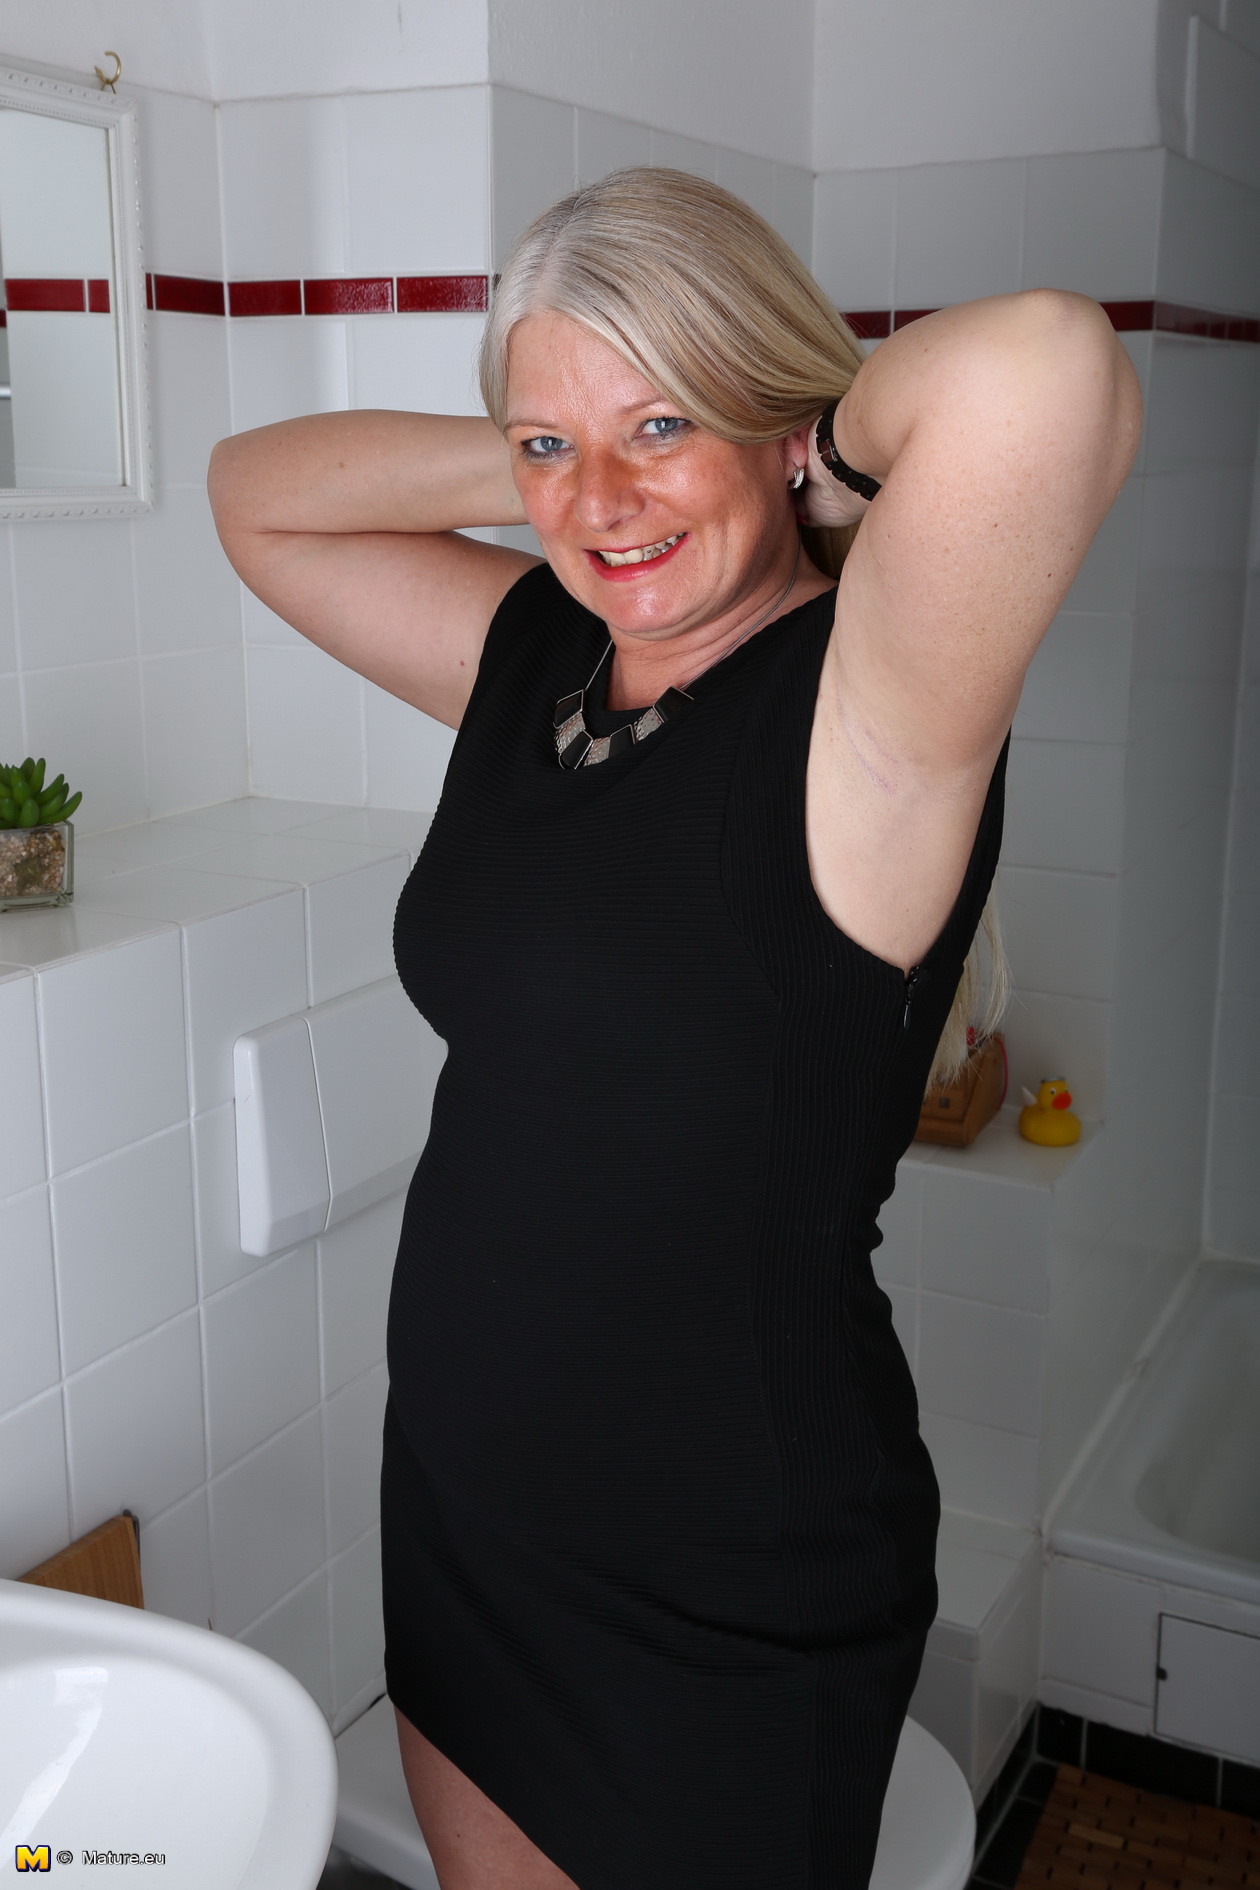 Naughty German housewife taking a shower picture